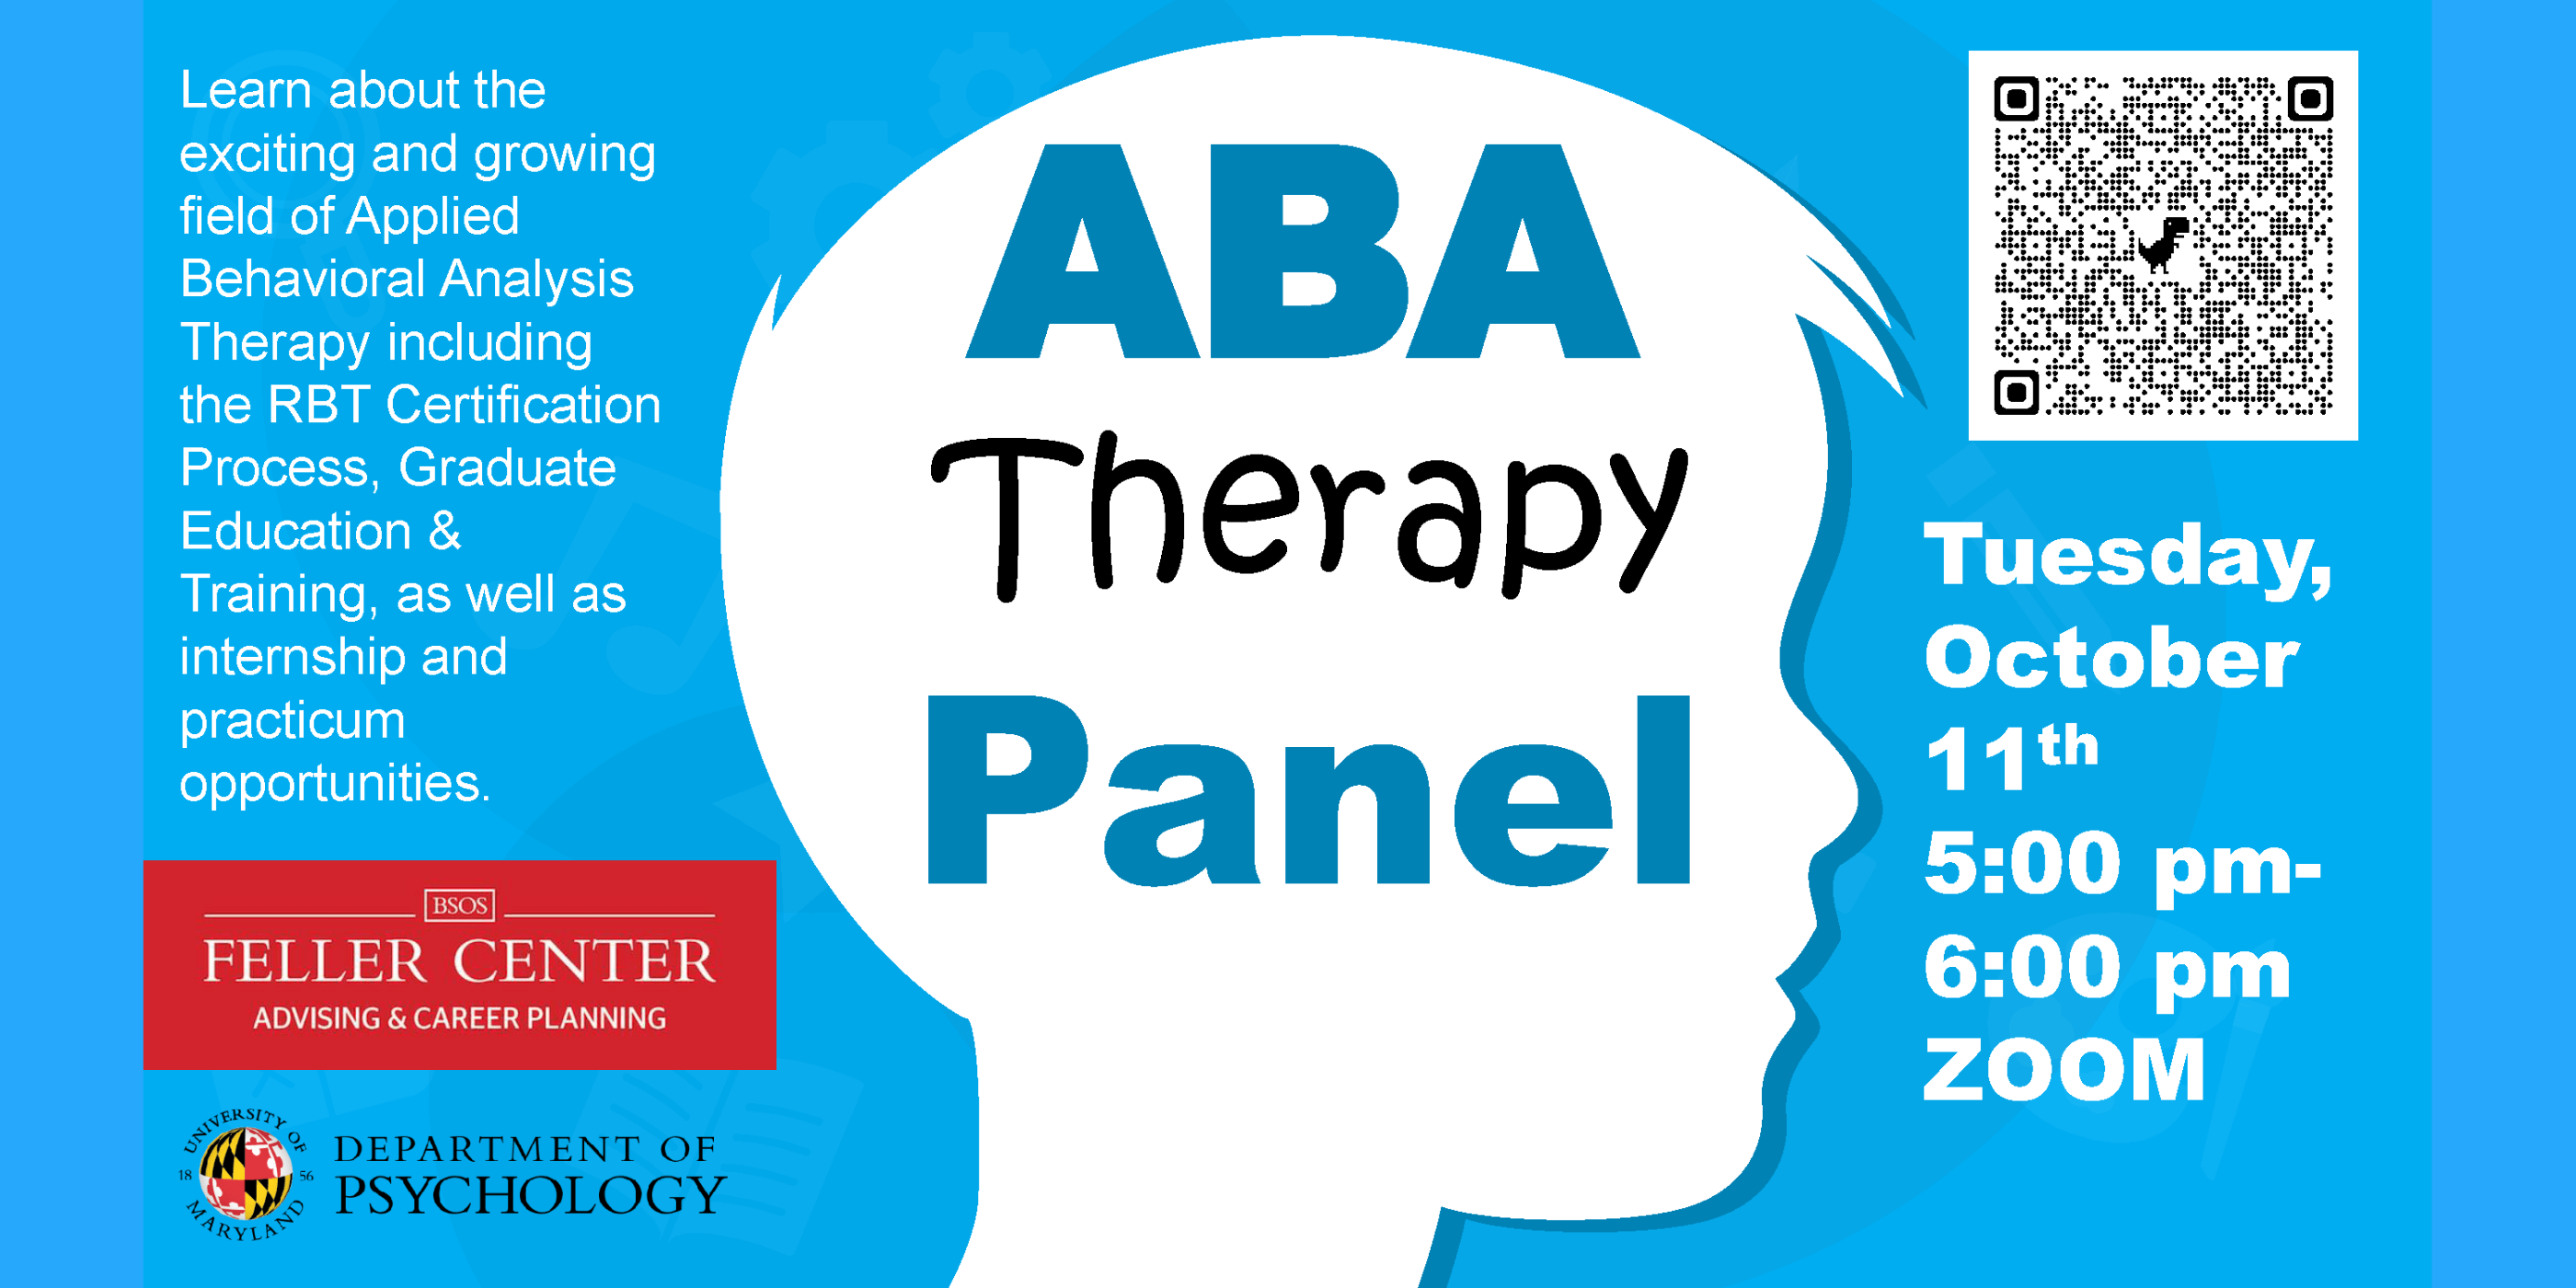 Graphic: ABA Therapy Panel 10/4/22 